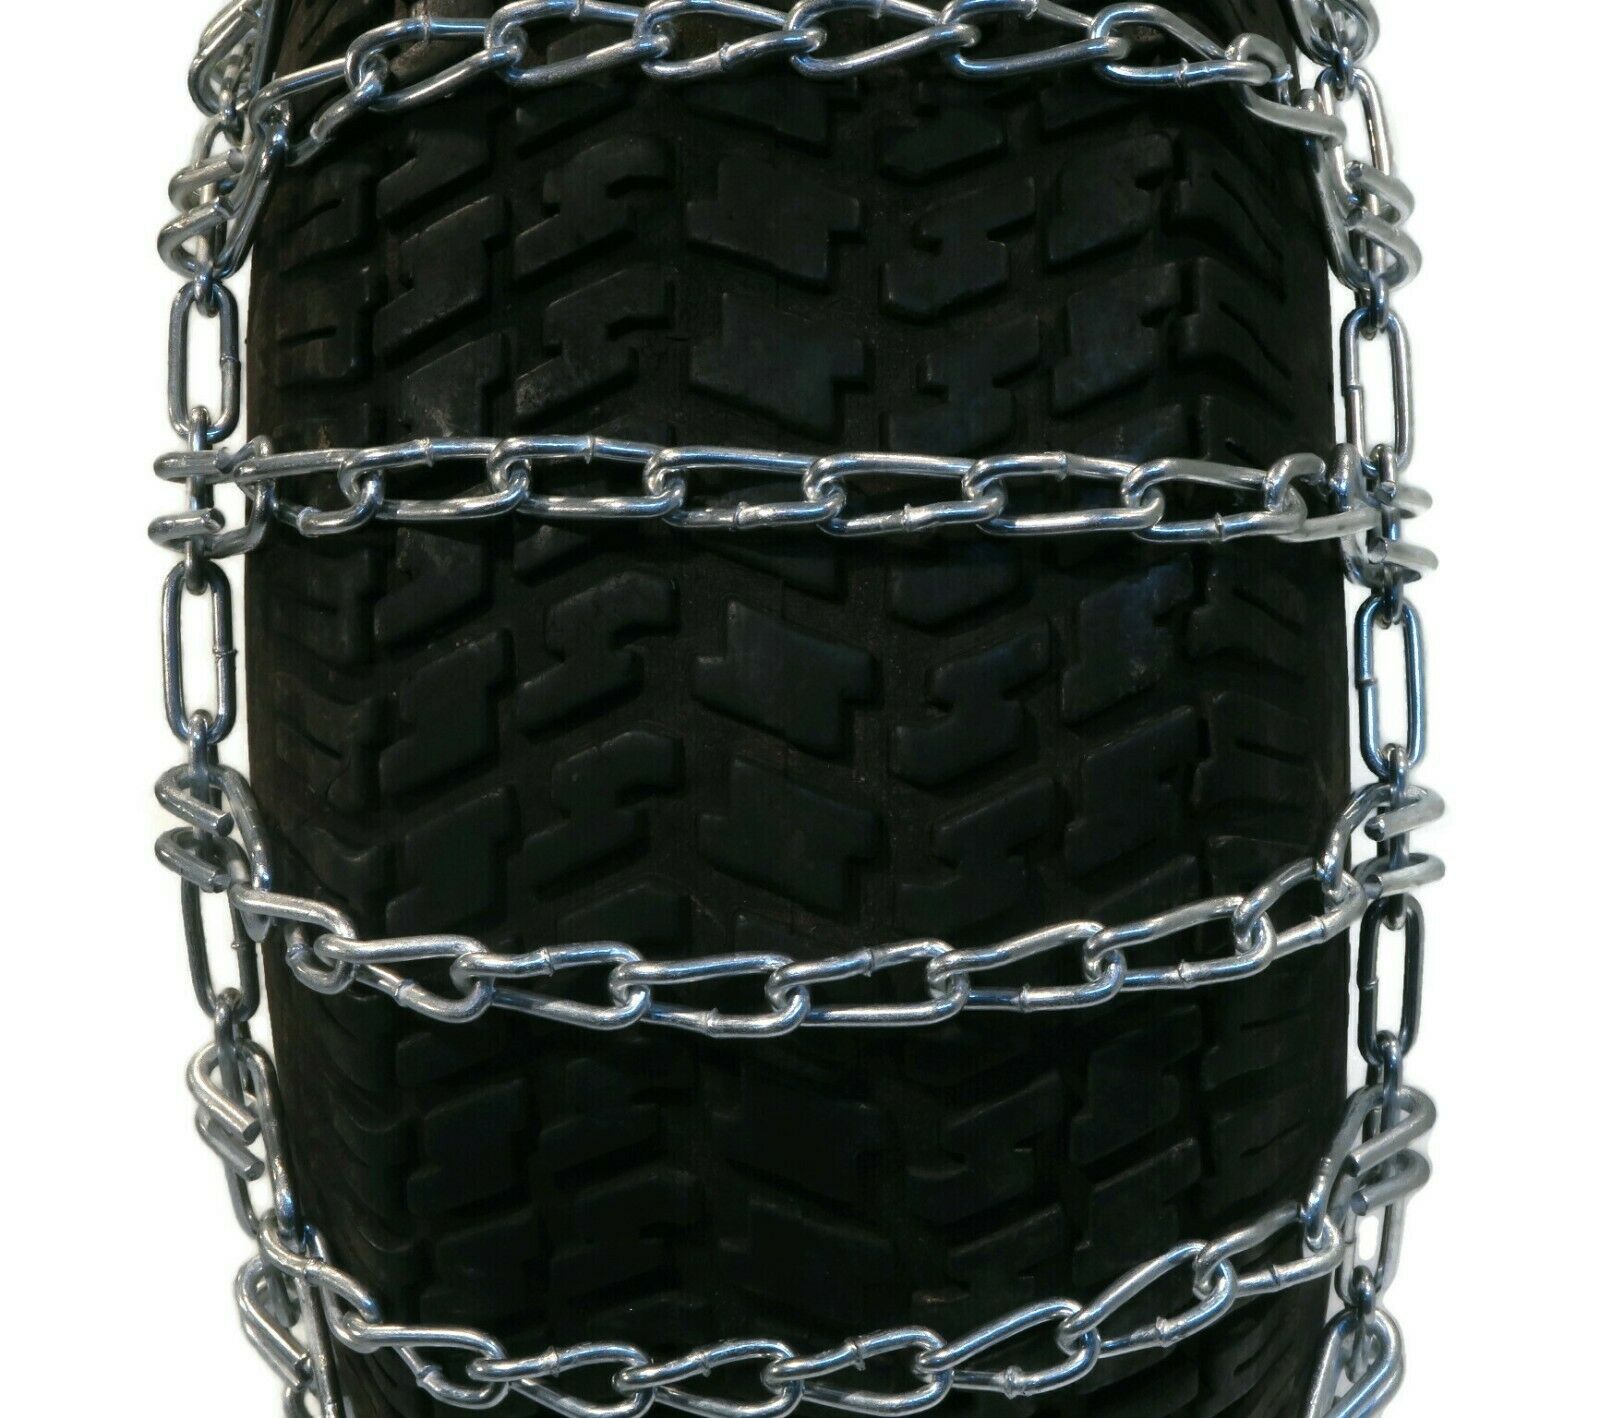 The ROP Shop | 26x12-12 Tire Chains 2 Link John Deere 400 & X Series Lawn Mower Tractor Rider - image 5 of 6